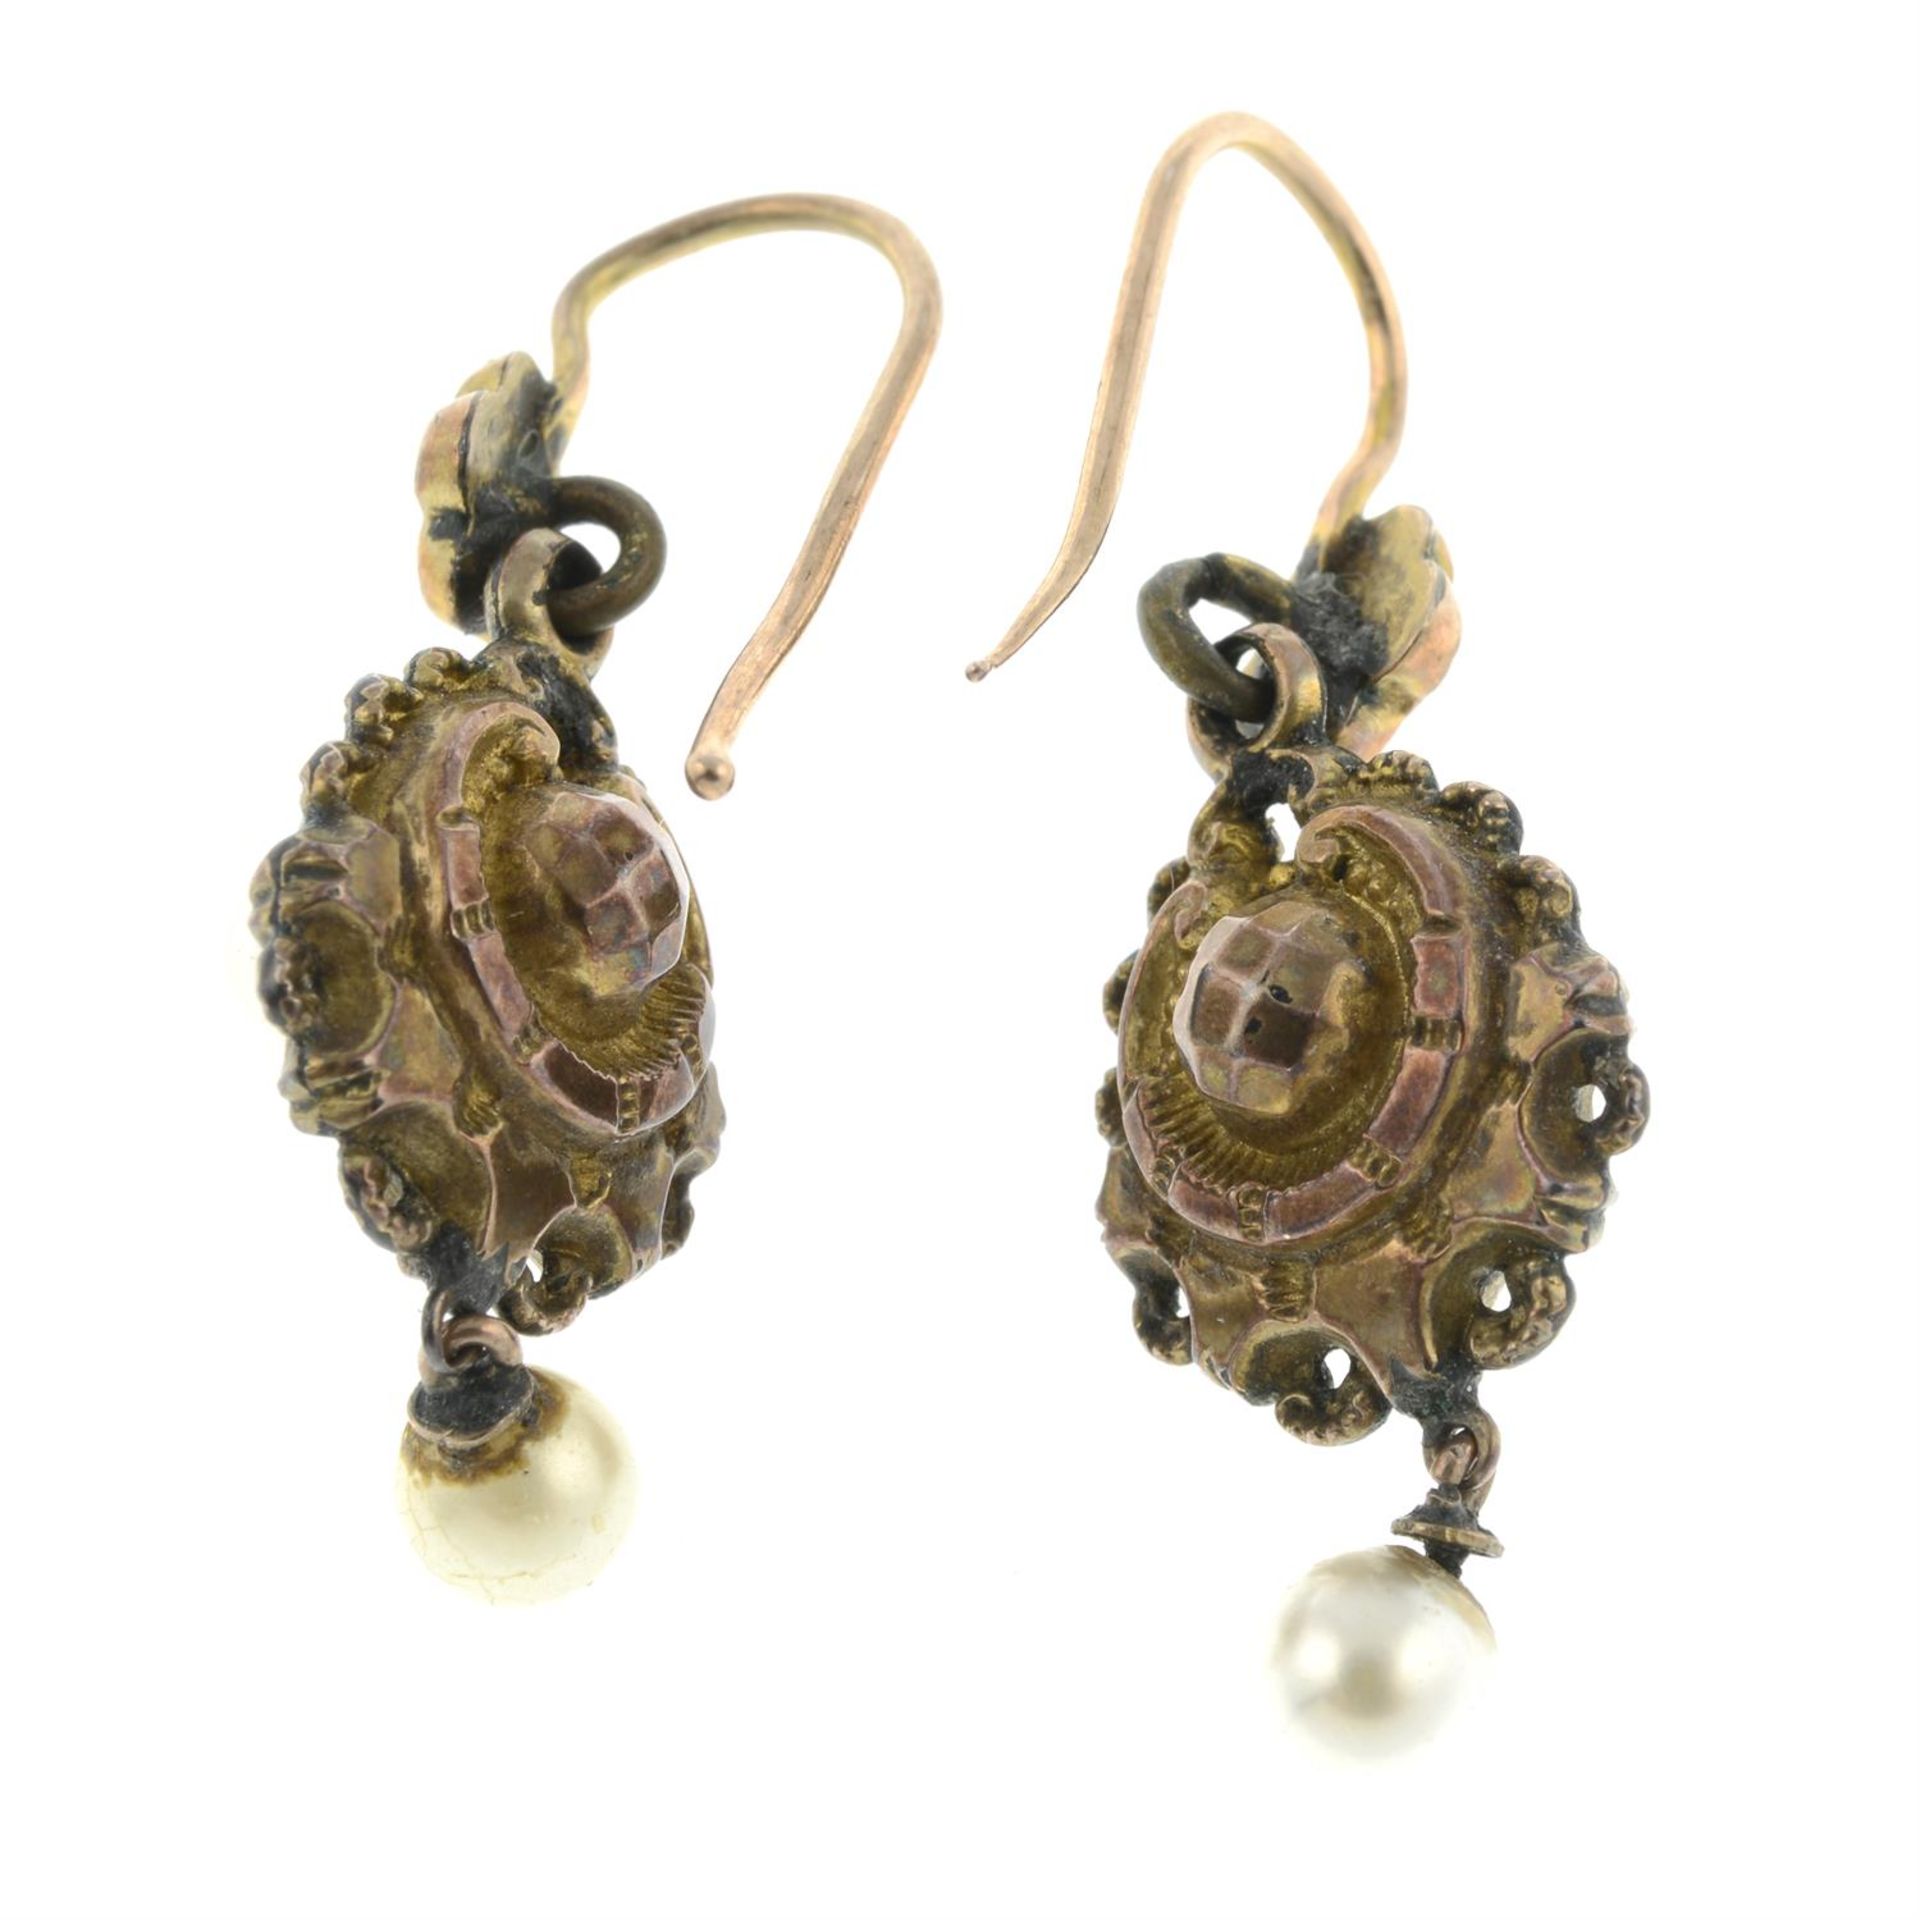 A pair of early 20th century ornate imitation pearl drop earrings. - Image 2 of 2